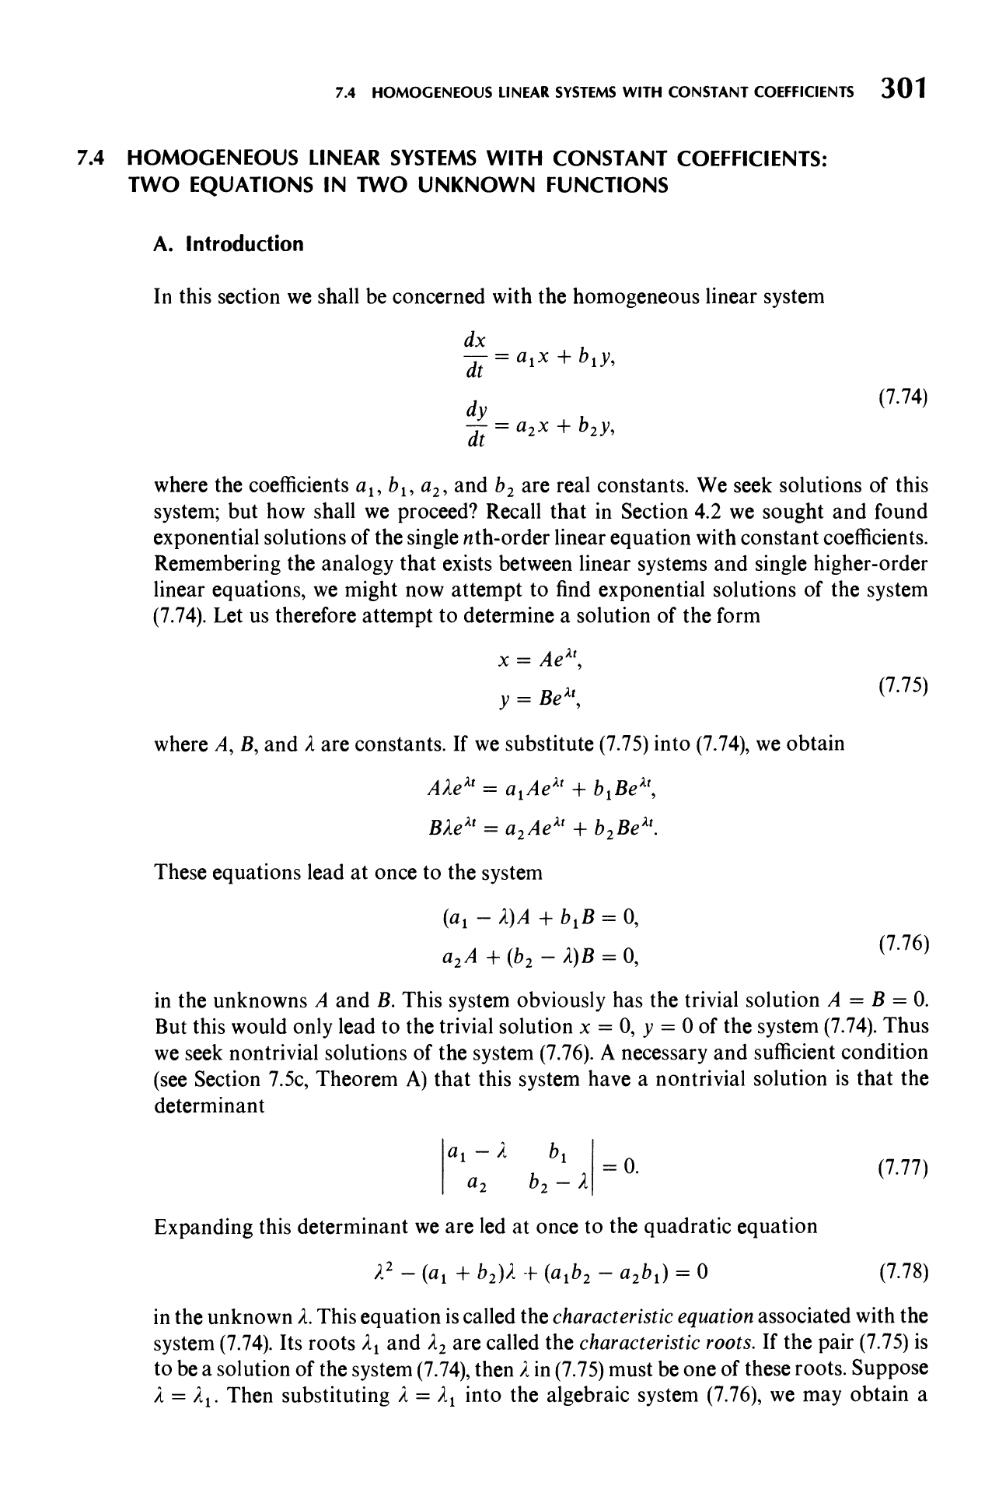 7.4  Homogeneous Linear Systems with Constant Coefficients